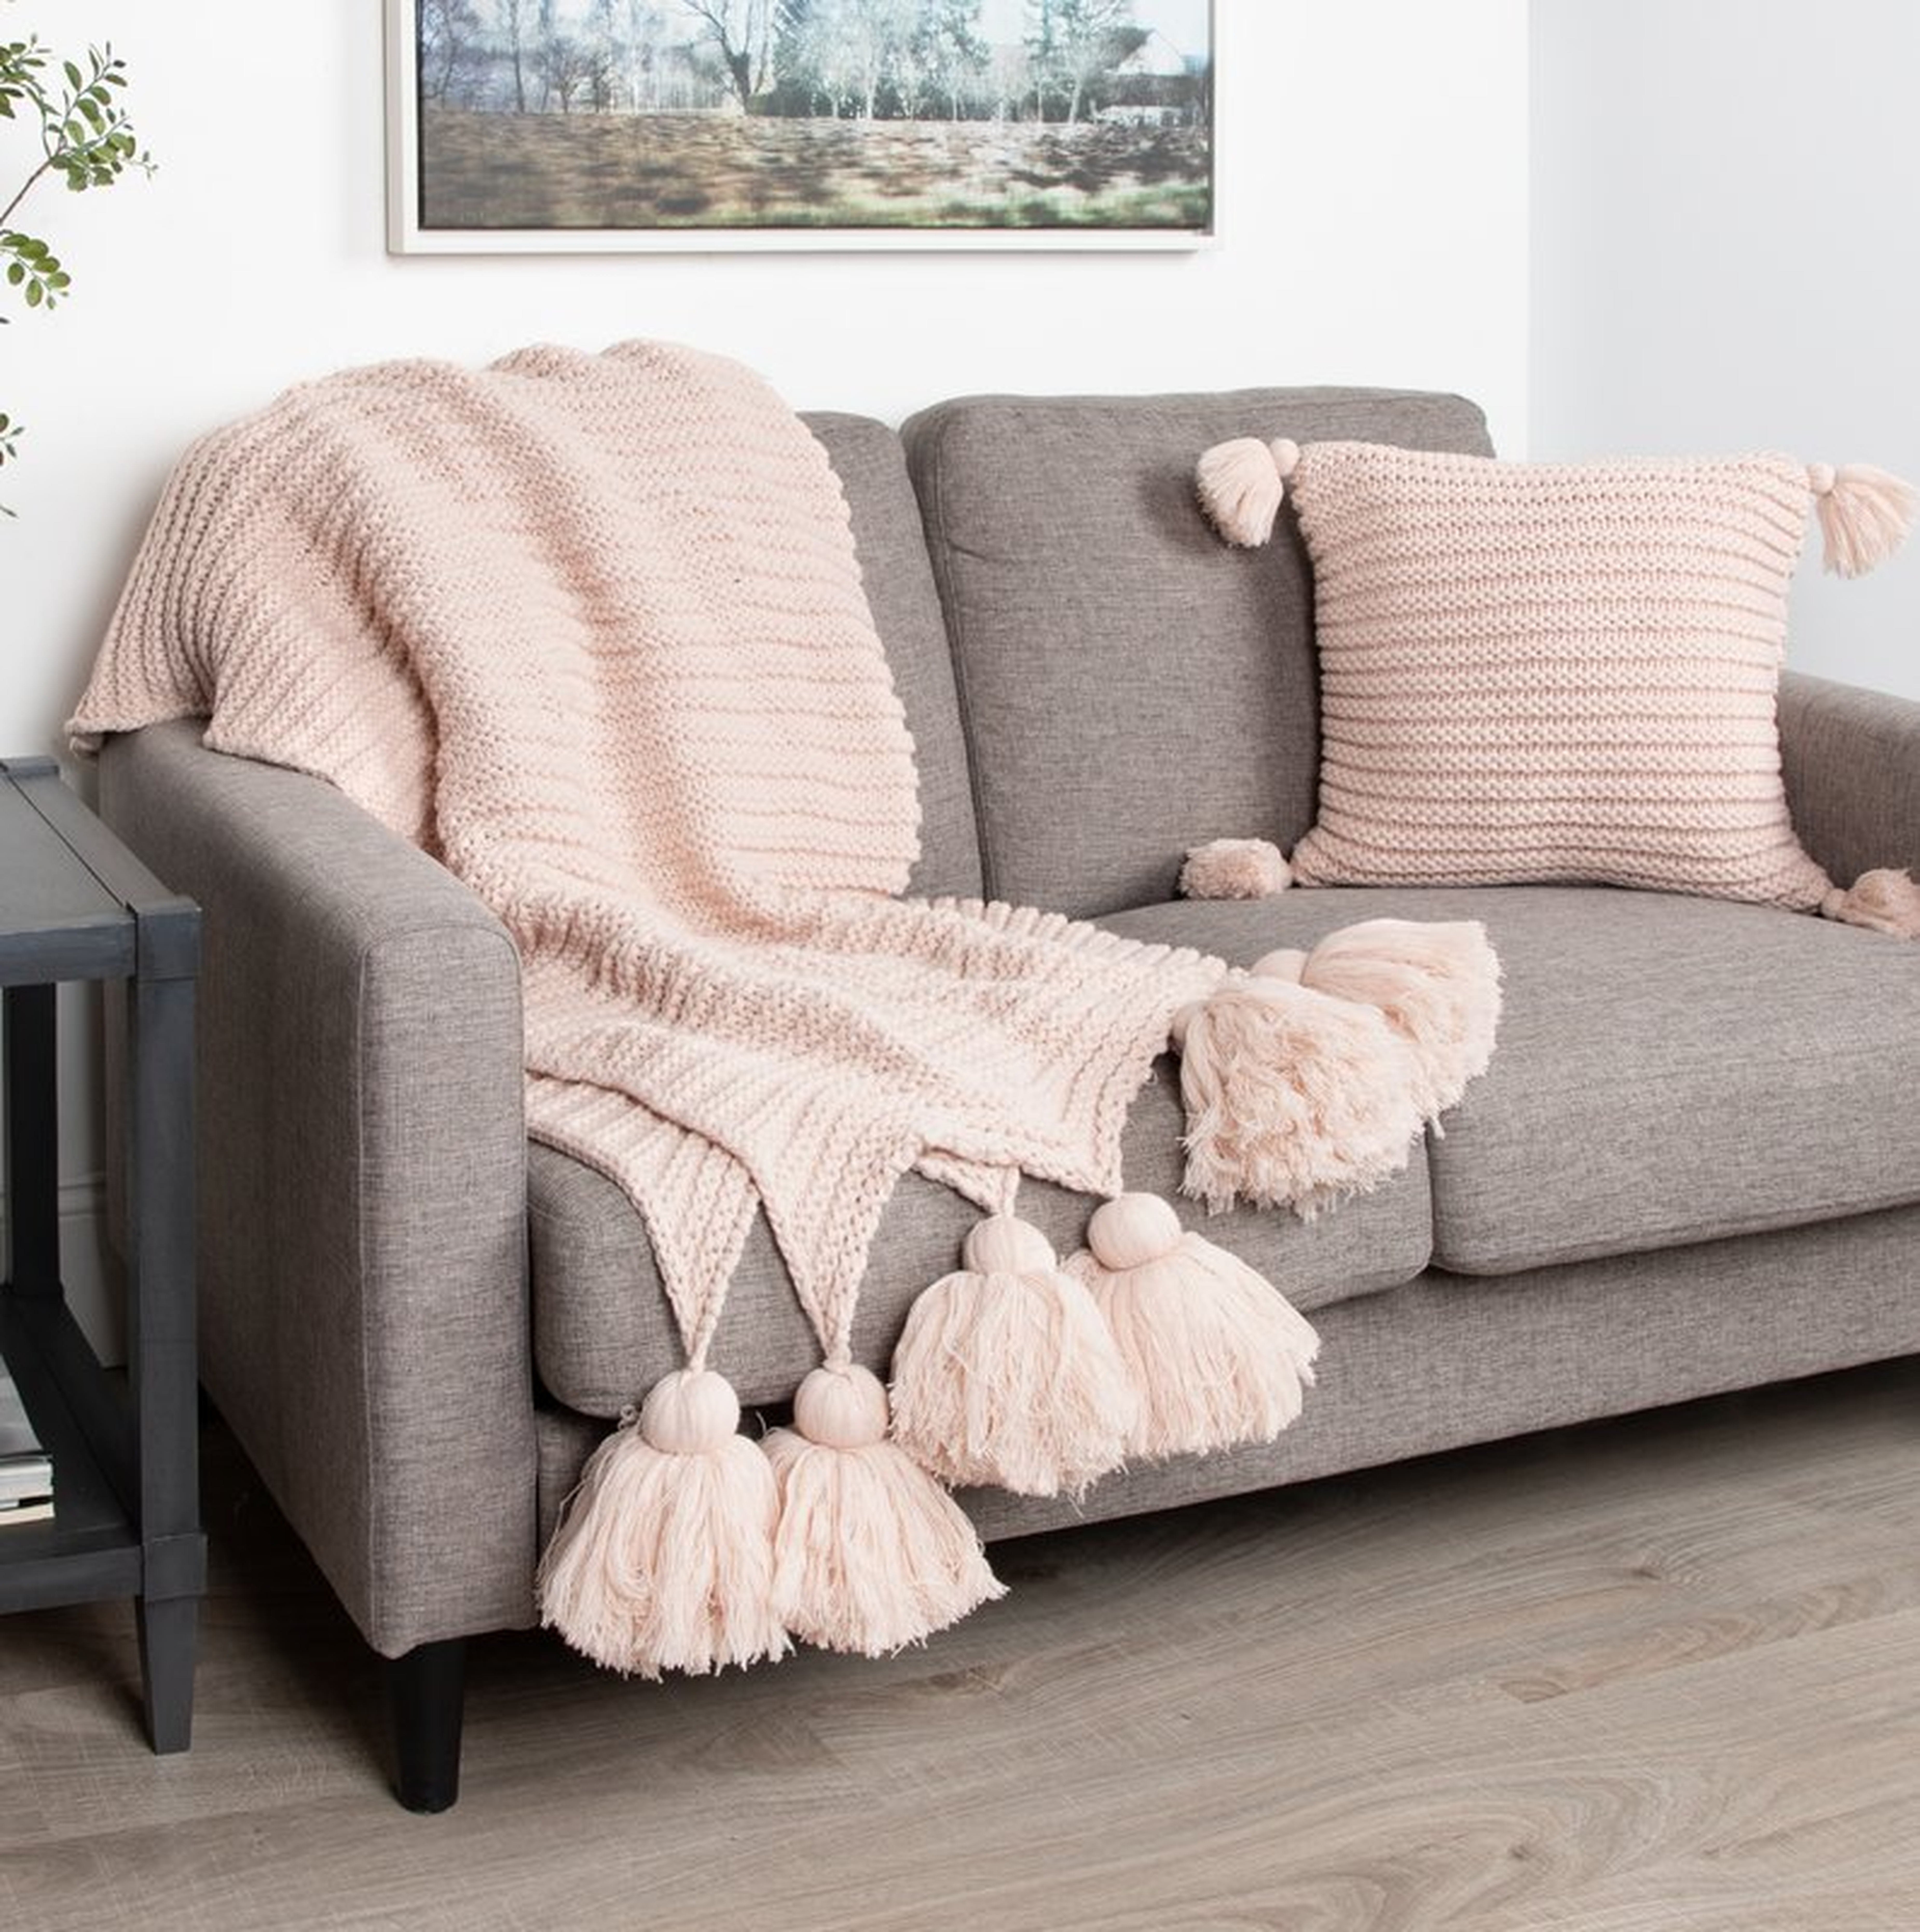 August Grove Dorcheer Chunky Ribbed Knit Throw Blanket in Dusty Pink - Wayfair